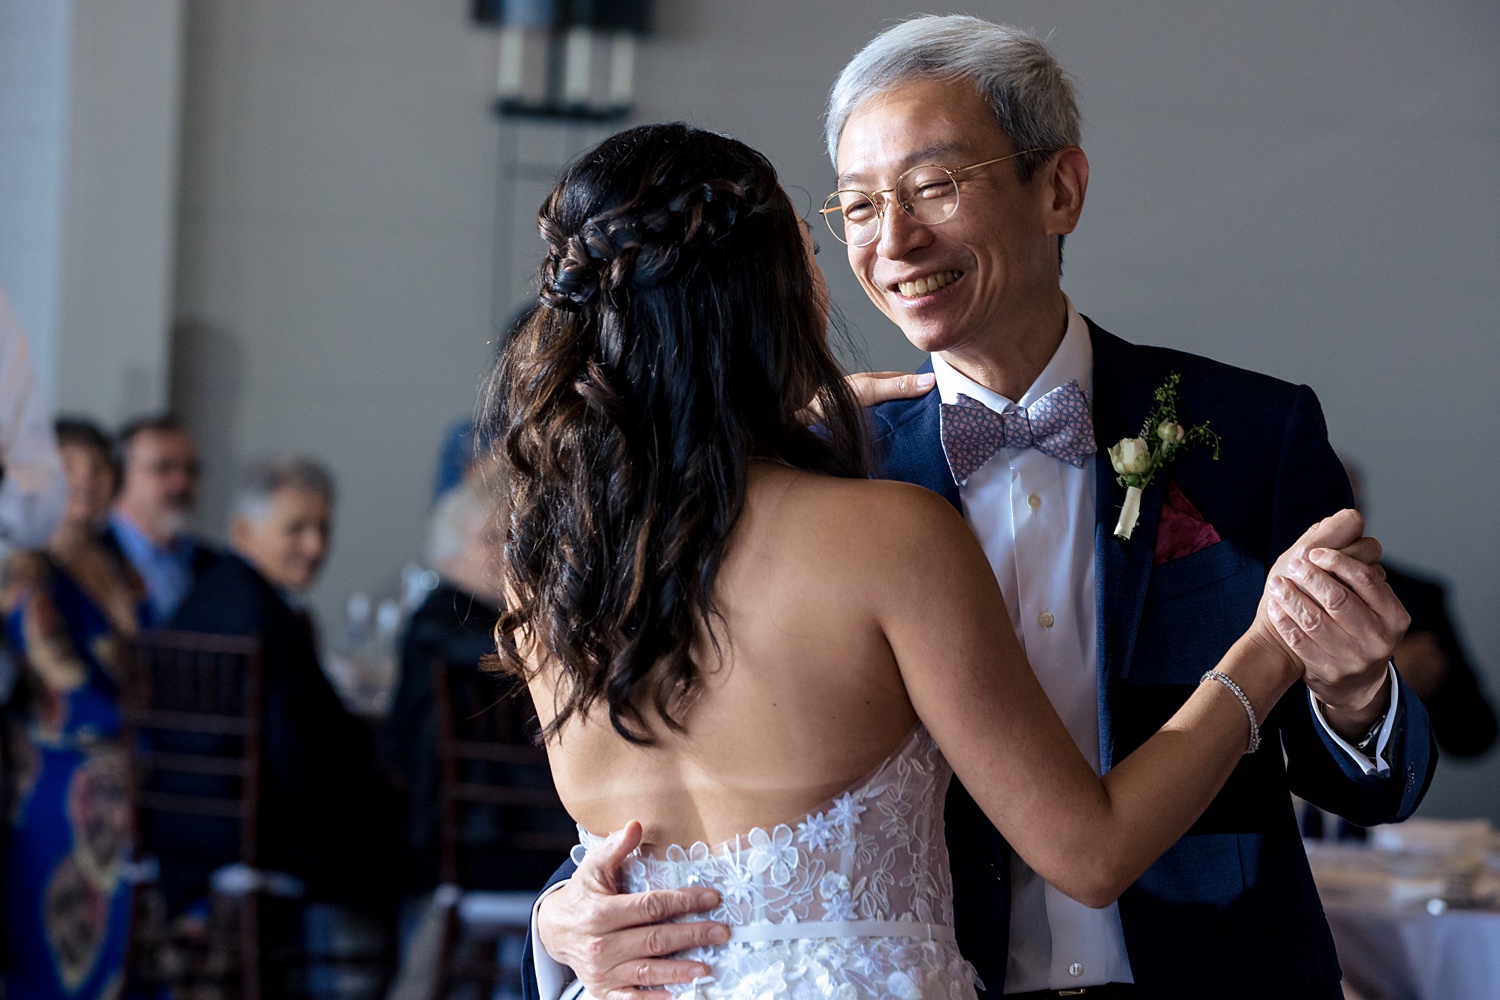 Father and daughter dance together during the wedding reception